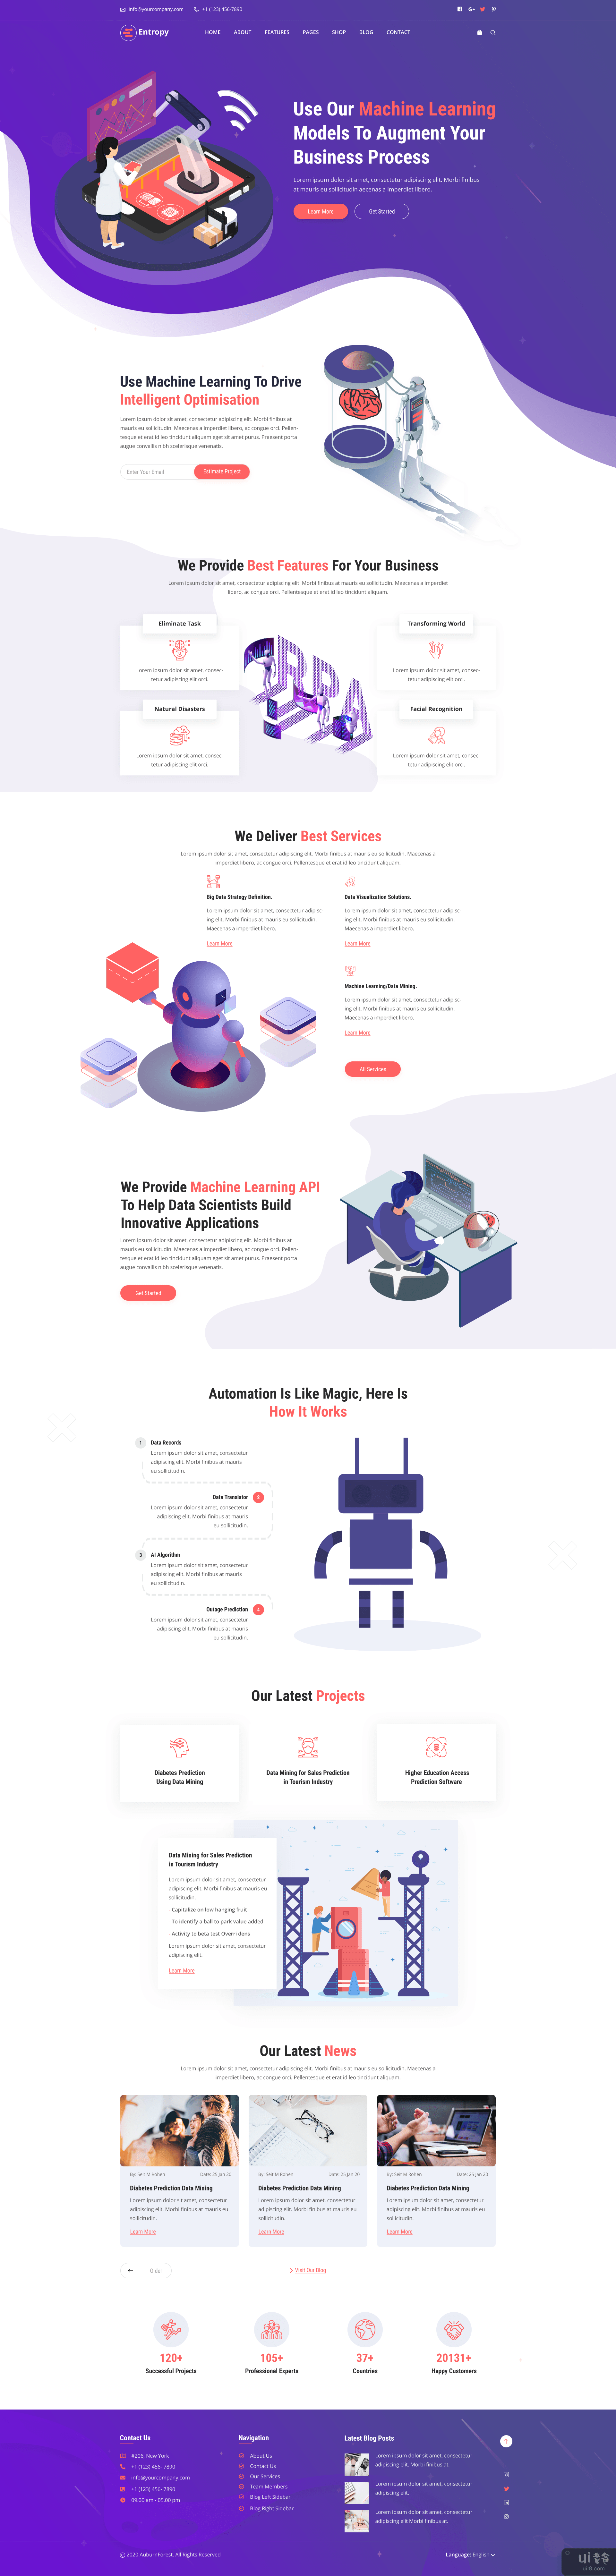 ENTROPY - 机器学习和人工智能启动模板(ENTROPY – Machine Learning and Artificial Intelligence Startup Template)插图